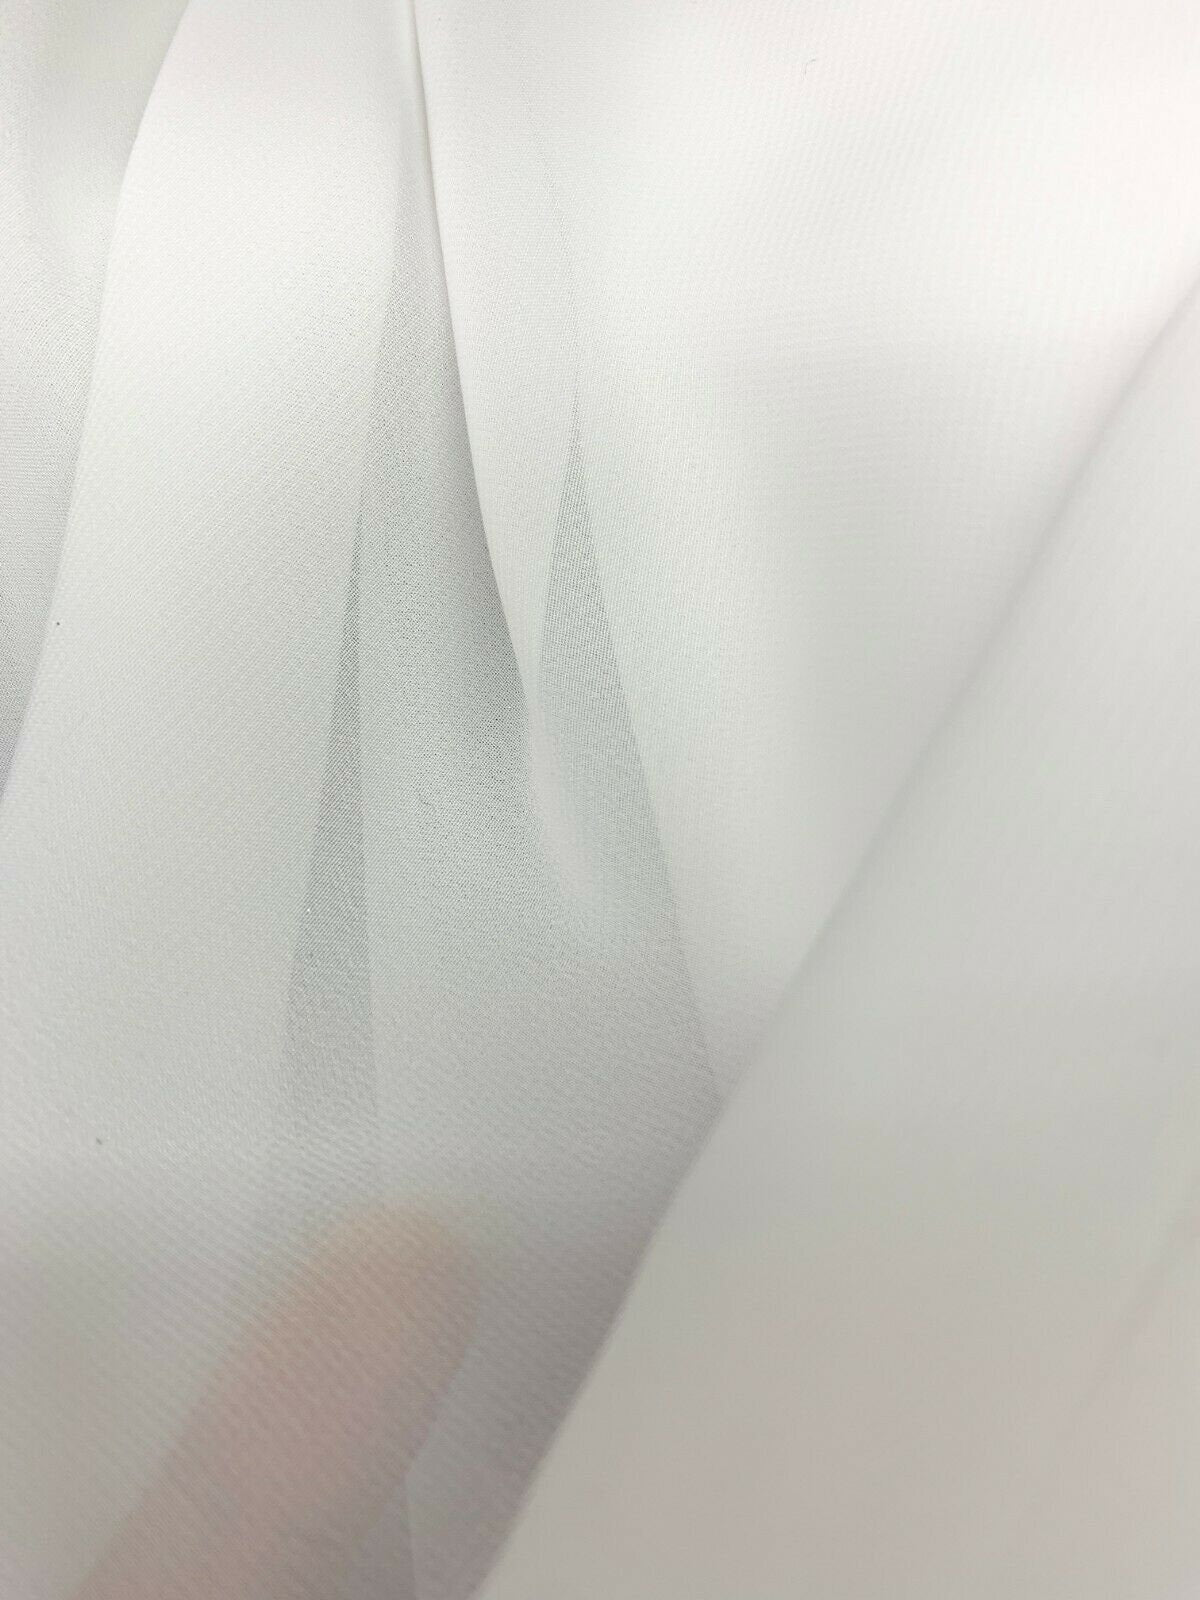 WHITE Sheer Solid Polyester Chiffon Fabric (60 in.) Sold By The Yard